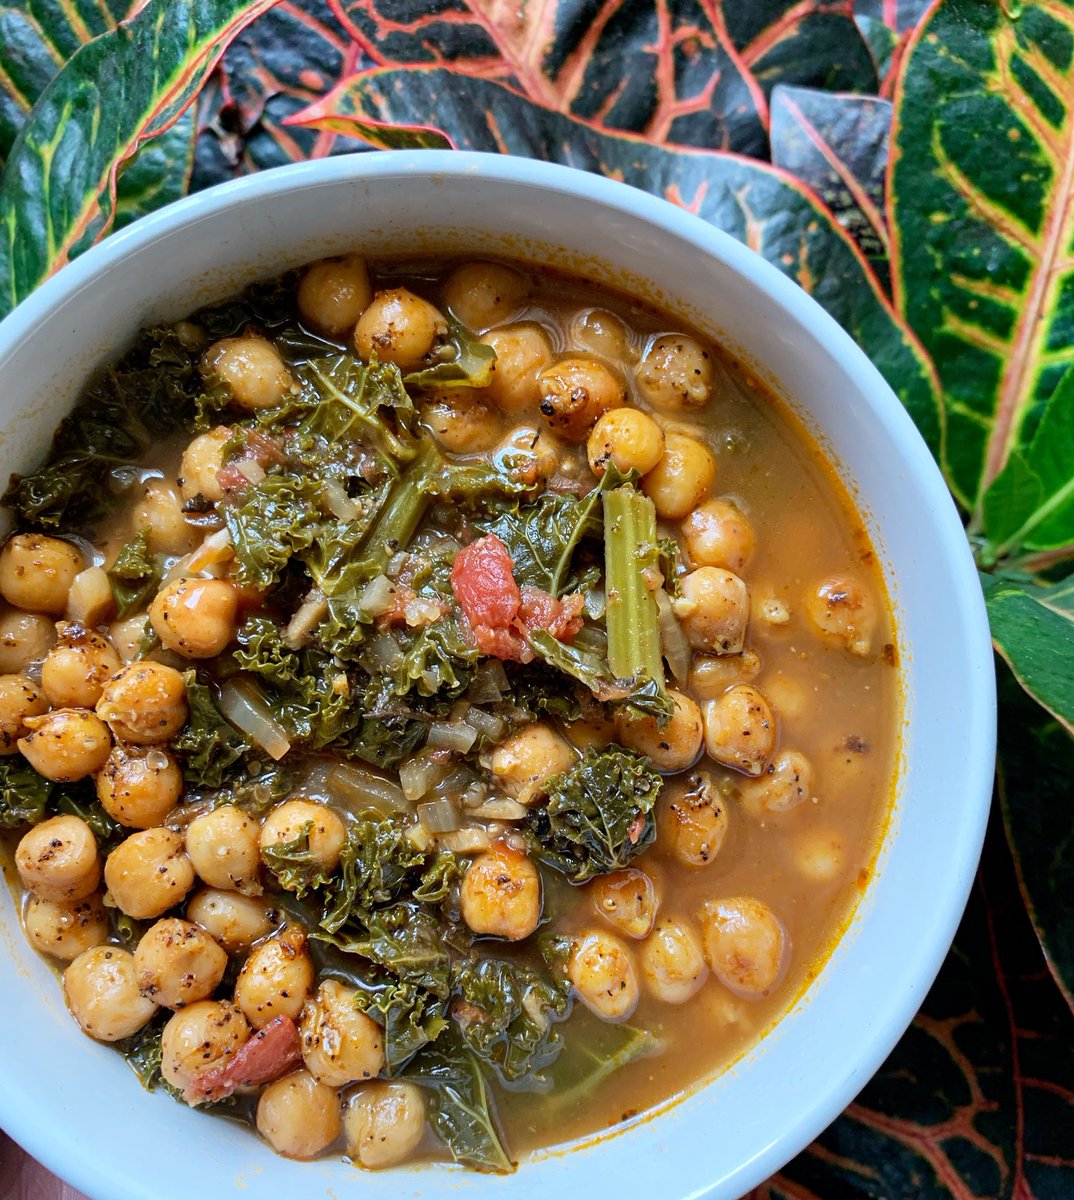 Greens without the turkey neck! I prefer kale and collard greens, but this recipe is good for mustard greens too. Full recipe here -  https://whereshebegins.com/plant-based-bre/2019/2/13/collard-green-recipe |  #plantbasedpath